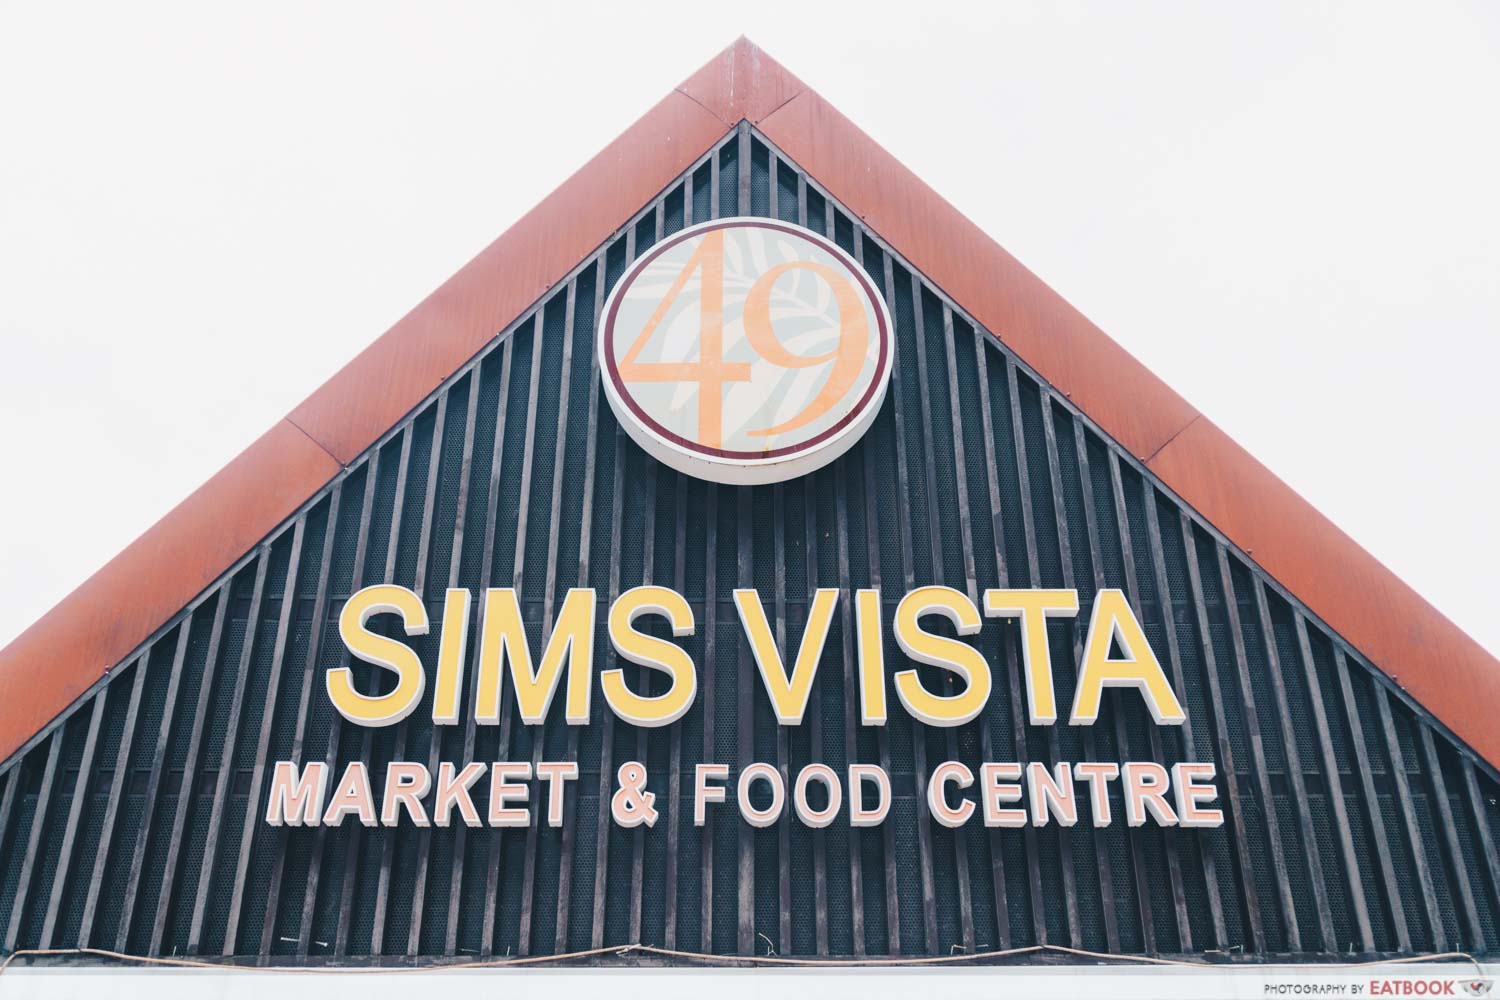 Sims Vista Market and Food Centre